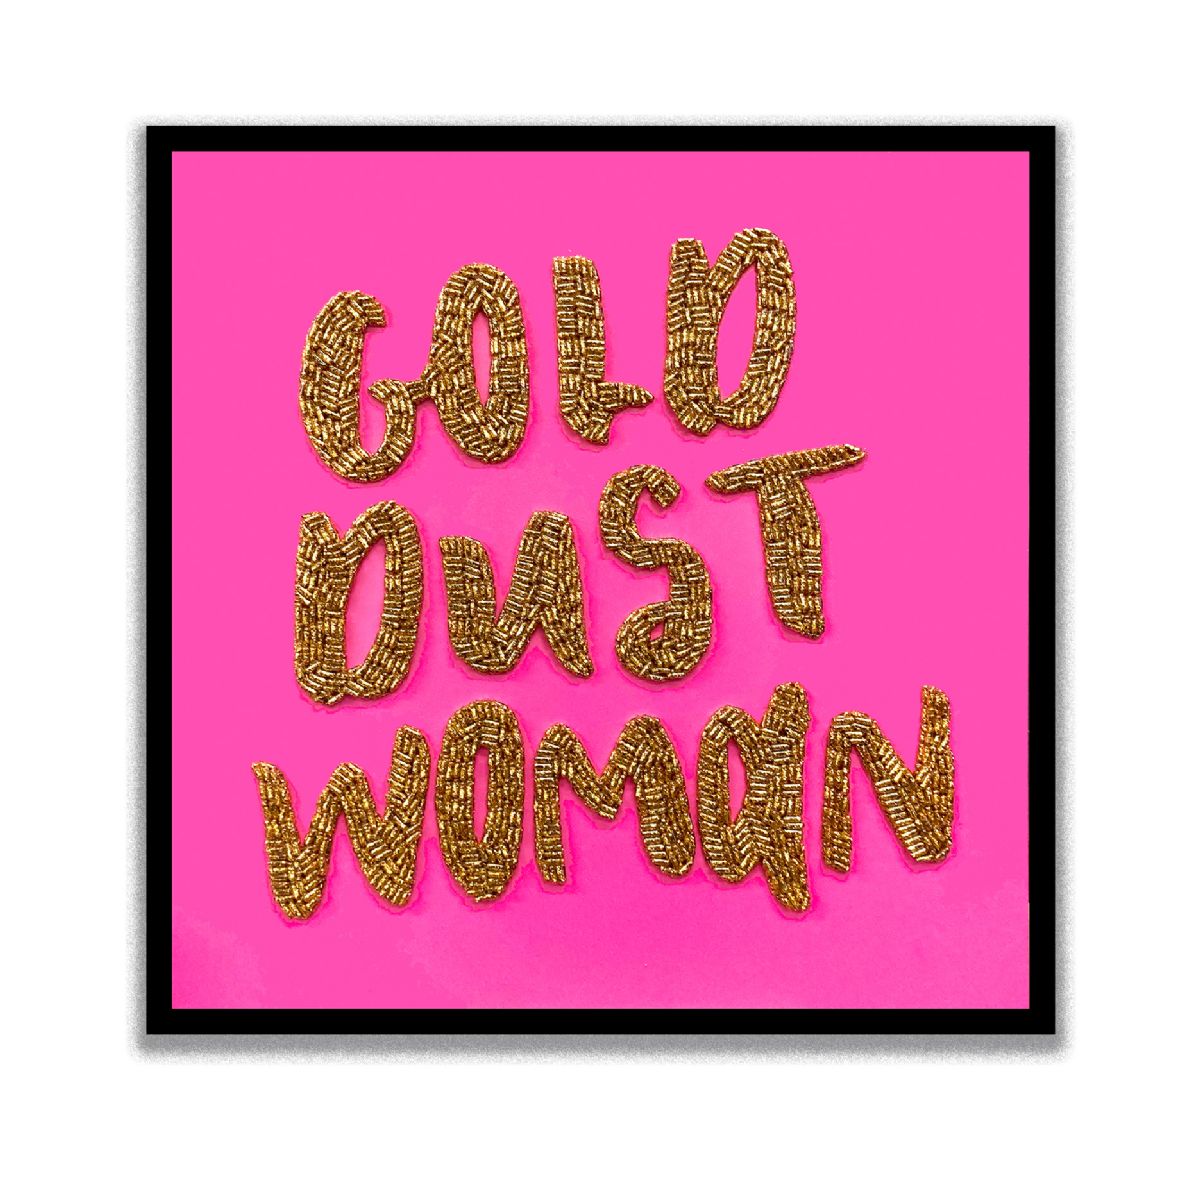 Gold Dust Woman by Emma Gibbons